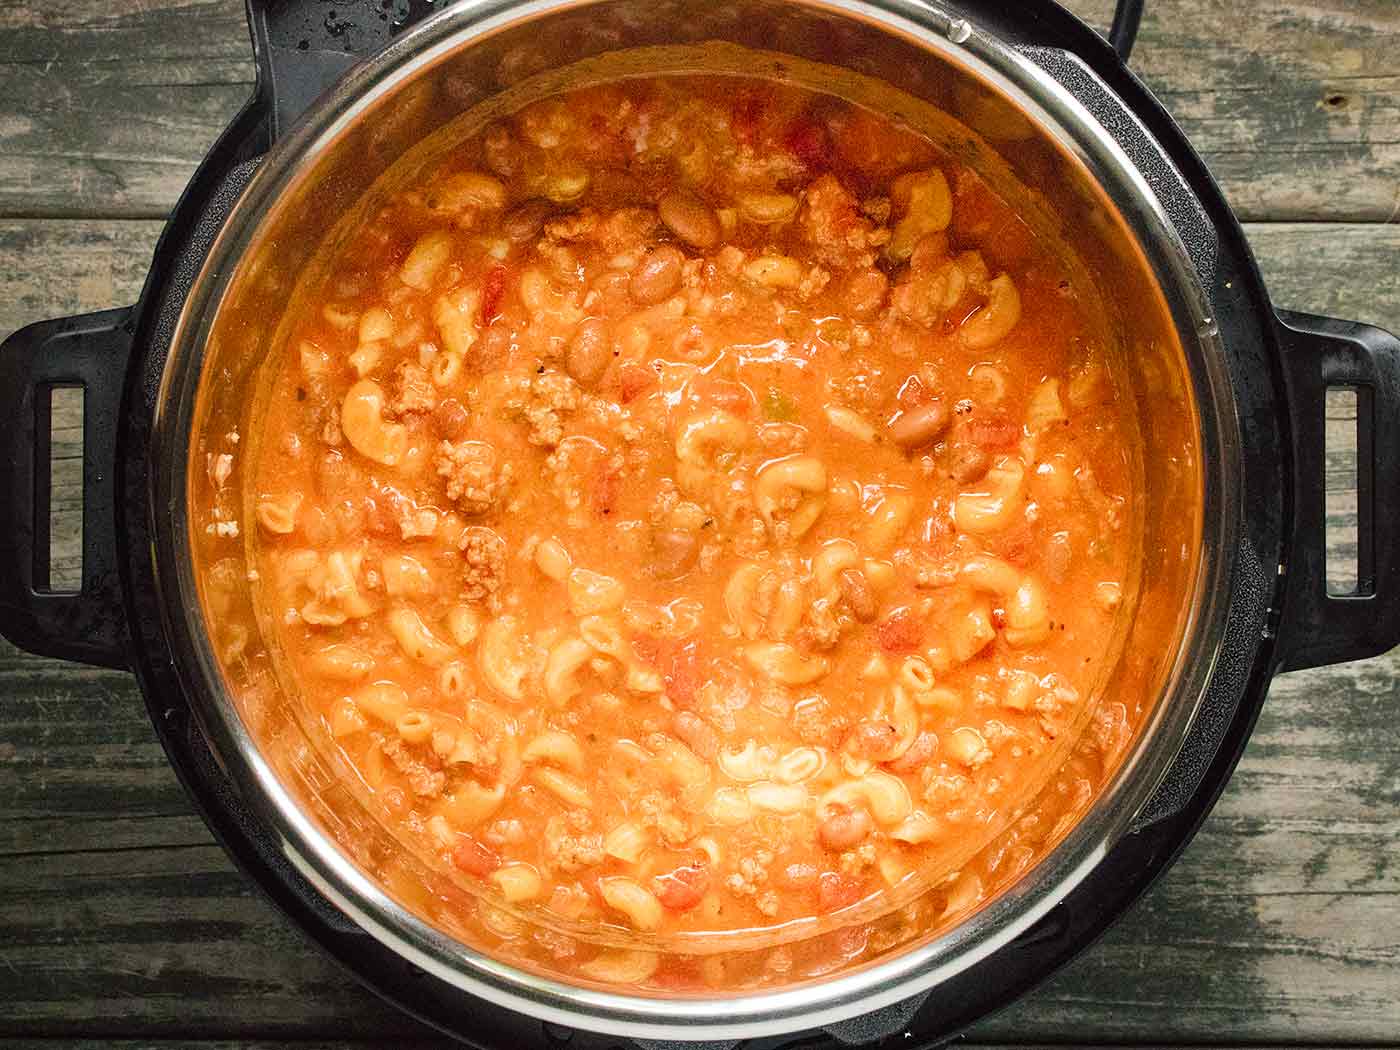 Instant Pot Chili Mac with Turkey and cheese, ready to serve from the pressure cooker